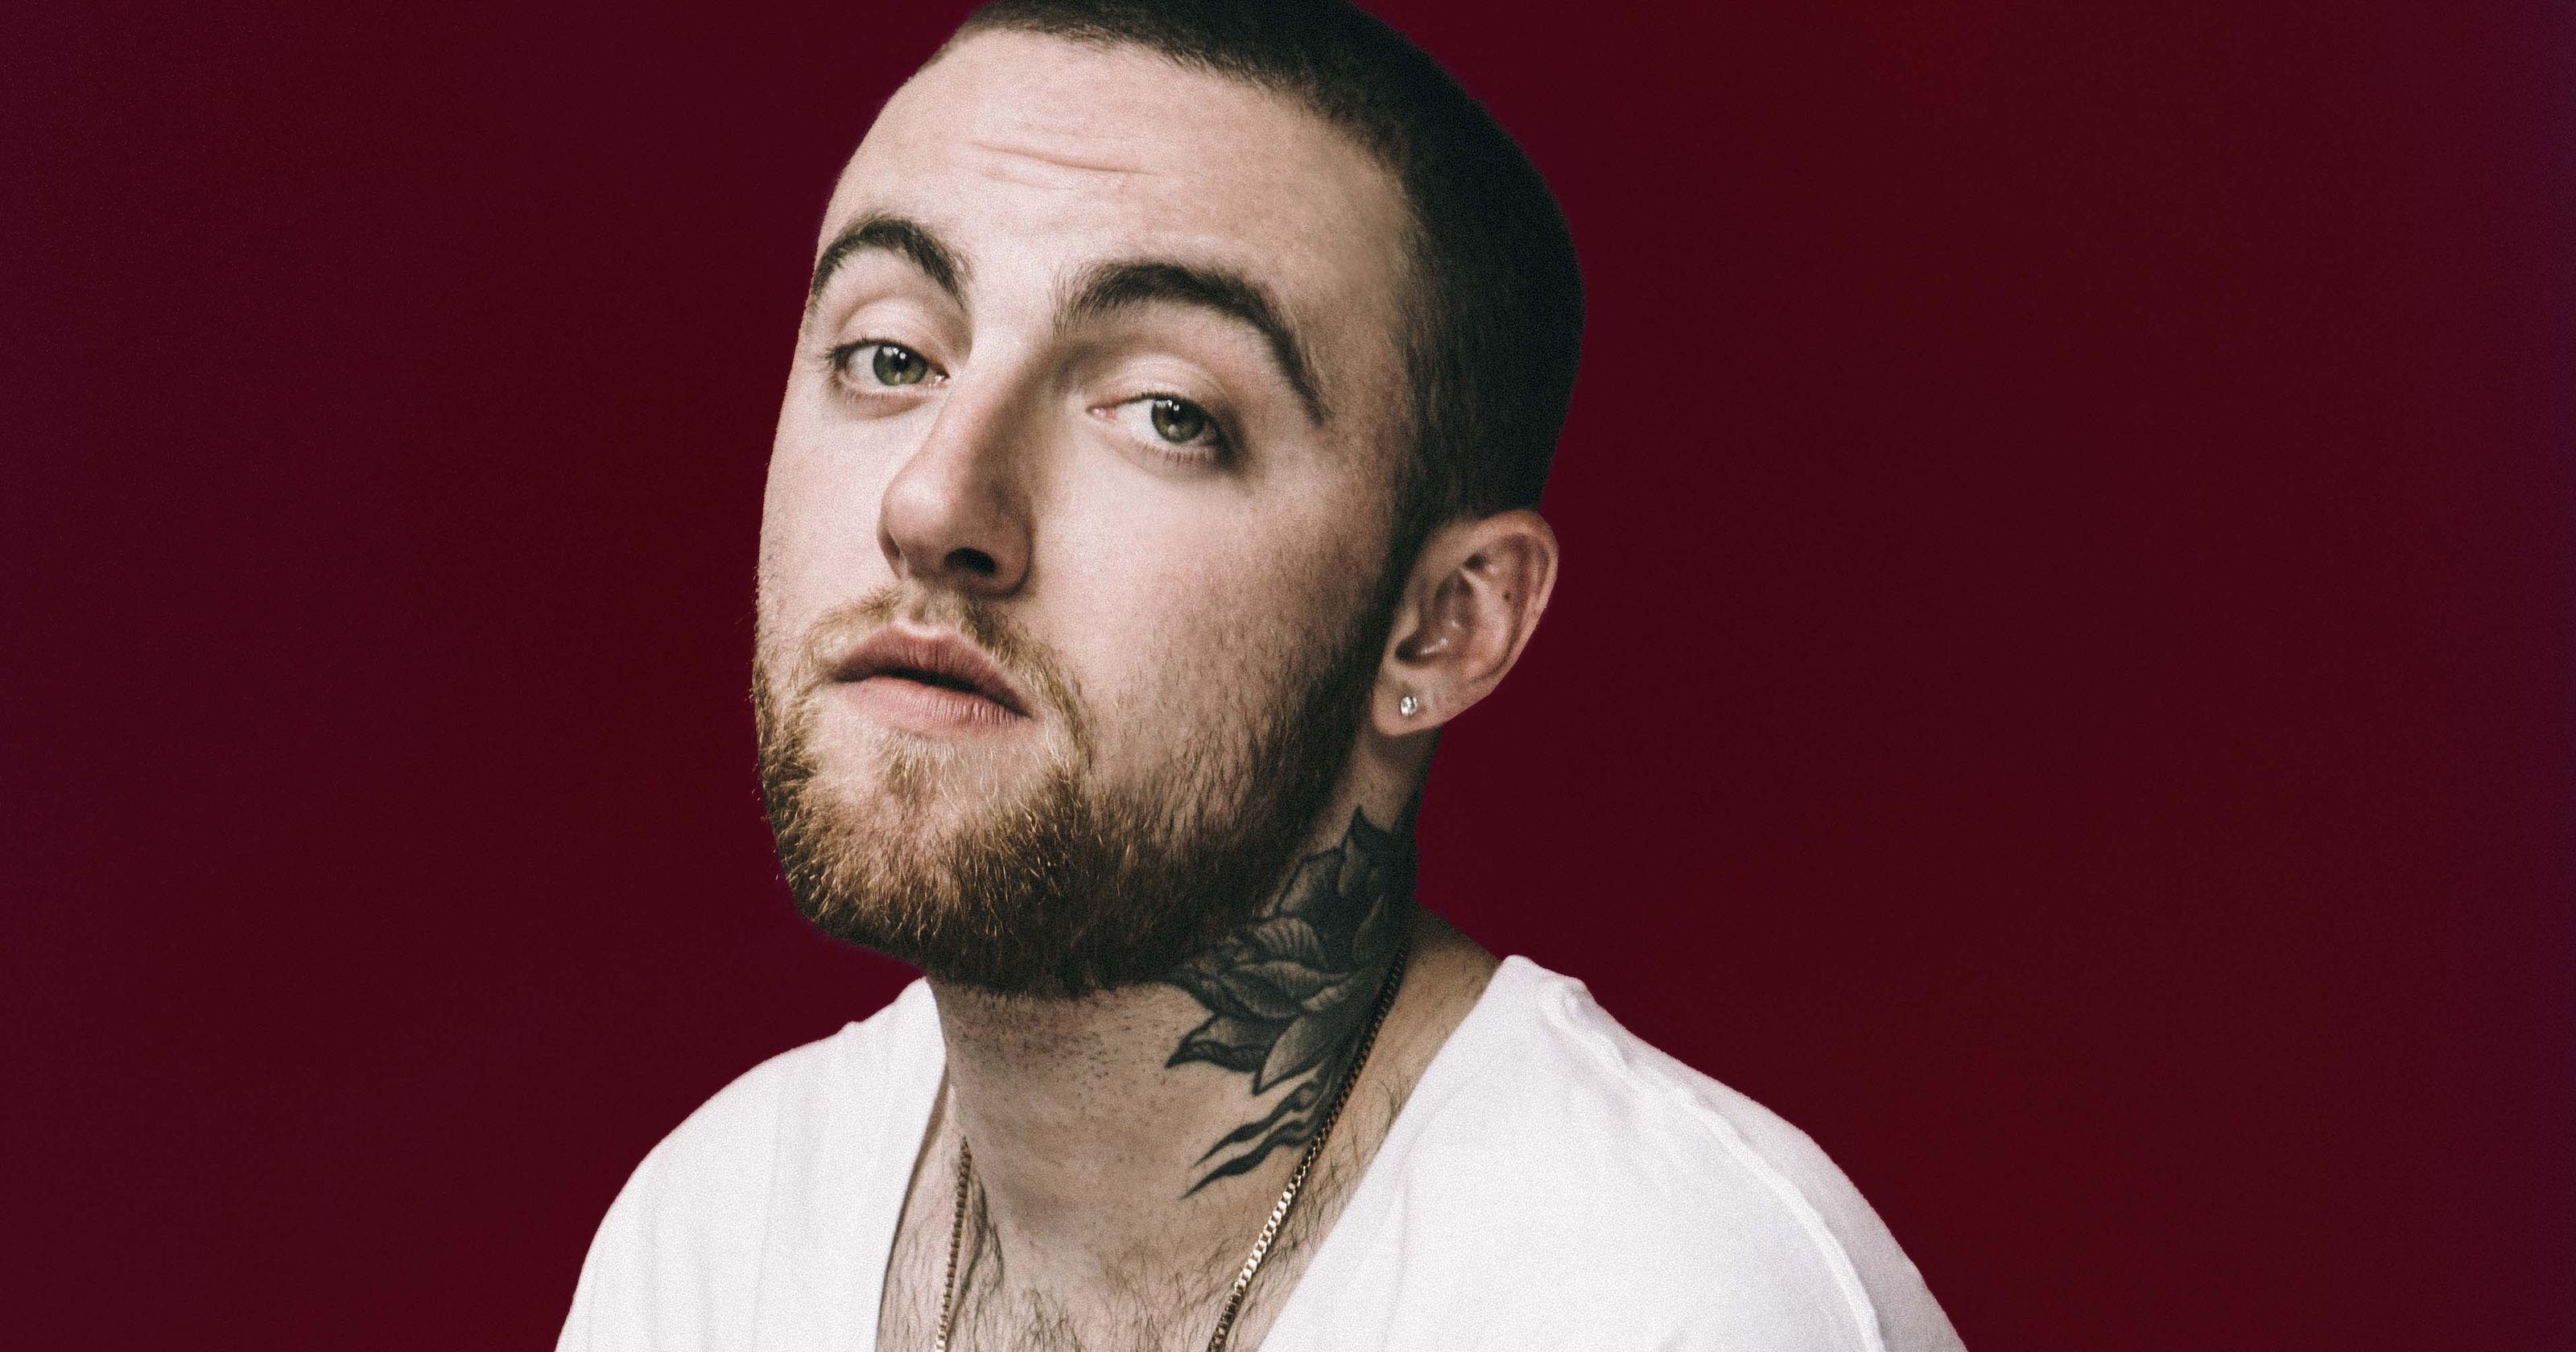 Mac Miller Wallpaper Image Photo Picture Background